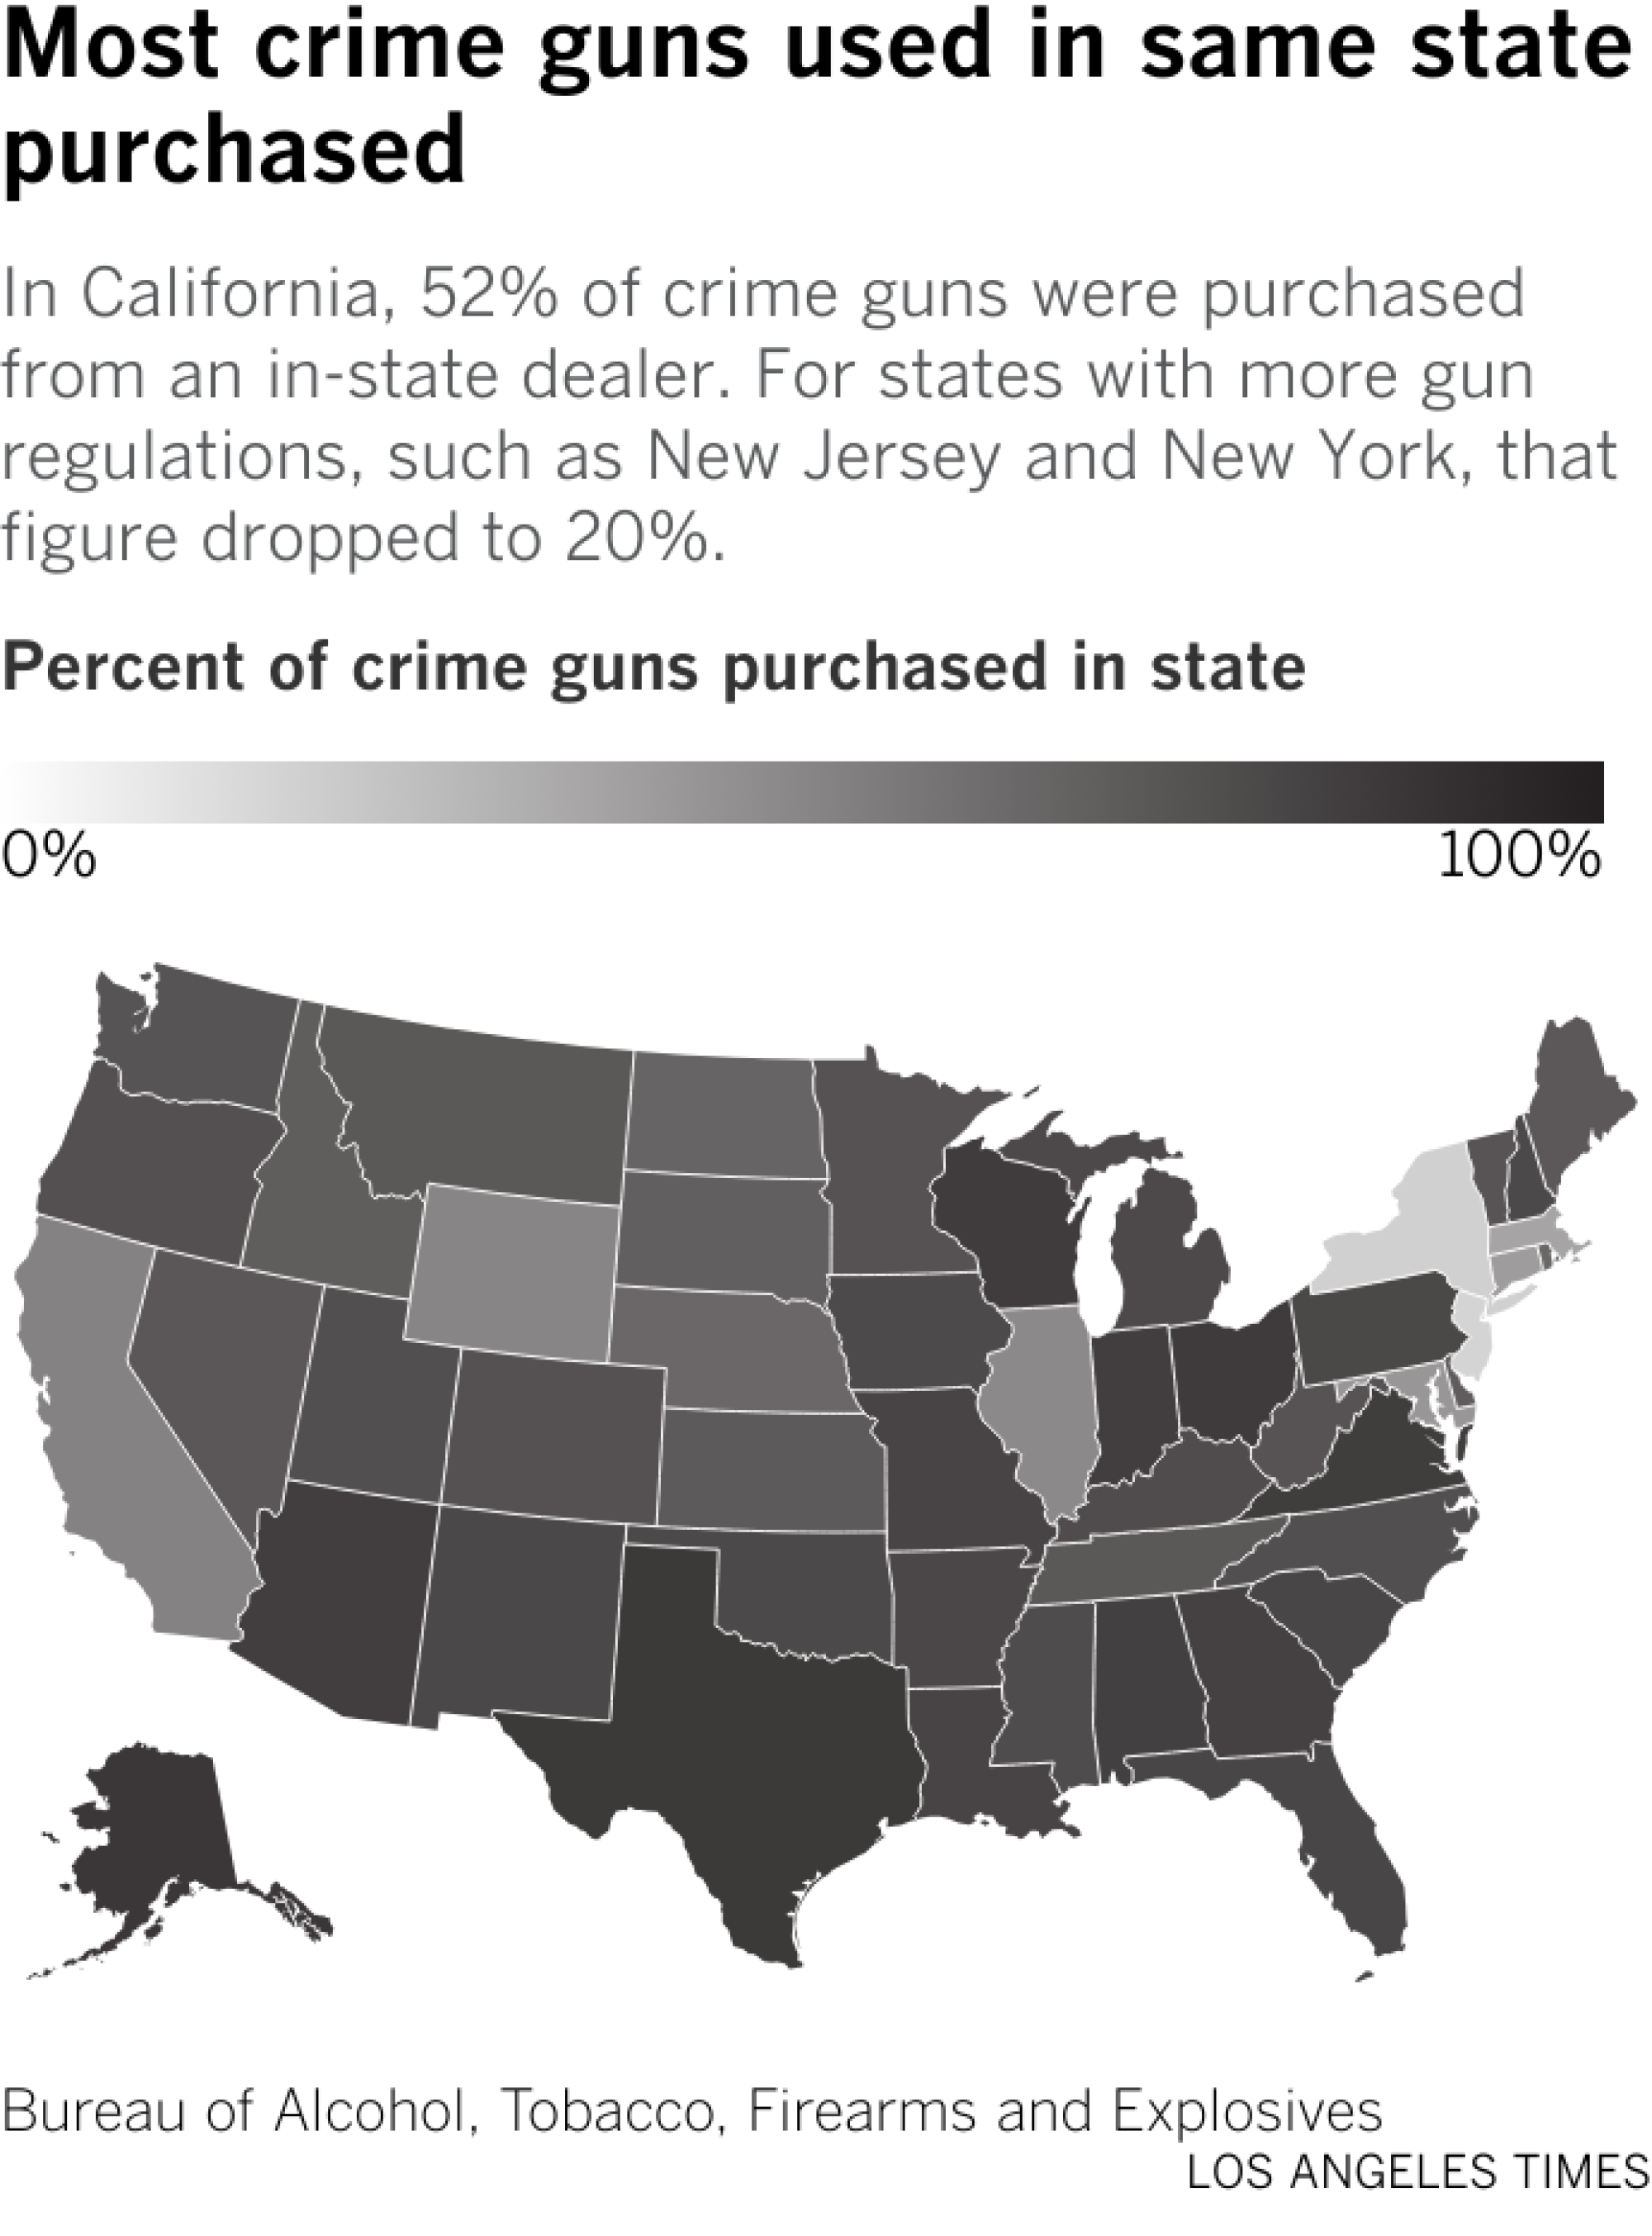 A state map of the U.S. showing the number of crime guns purchased in-state. Arizona and Texas ranked among the highest, while New York and New Jersey were at the bottom.